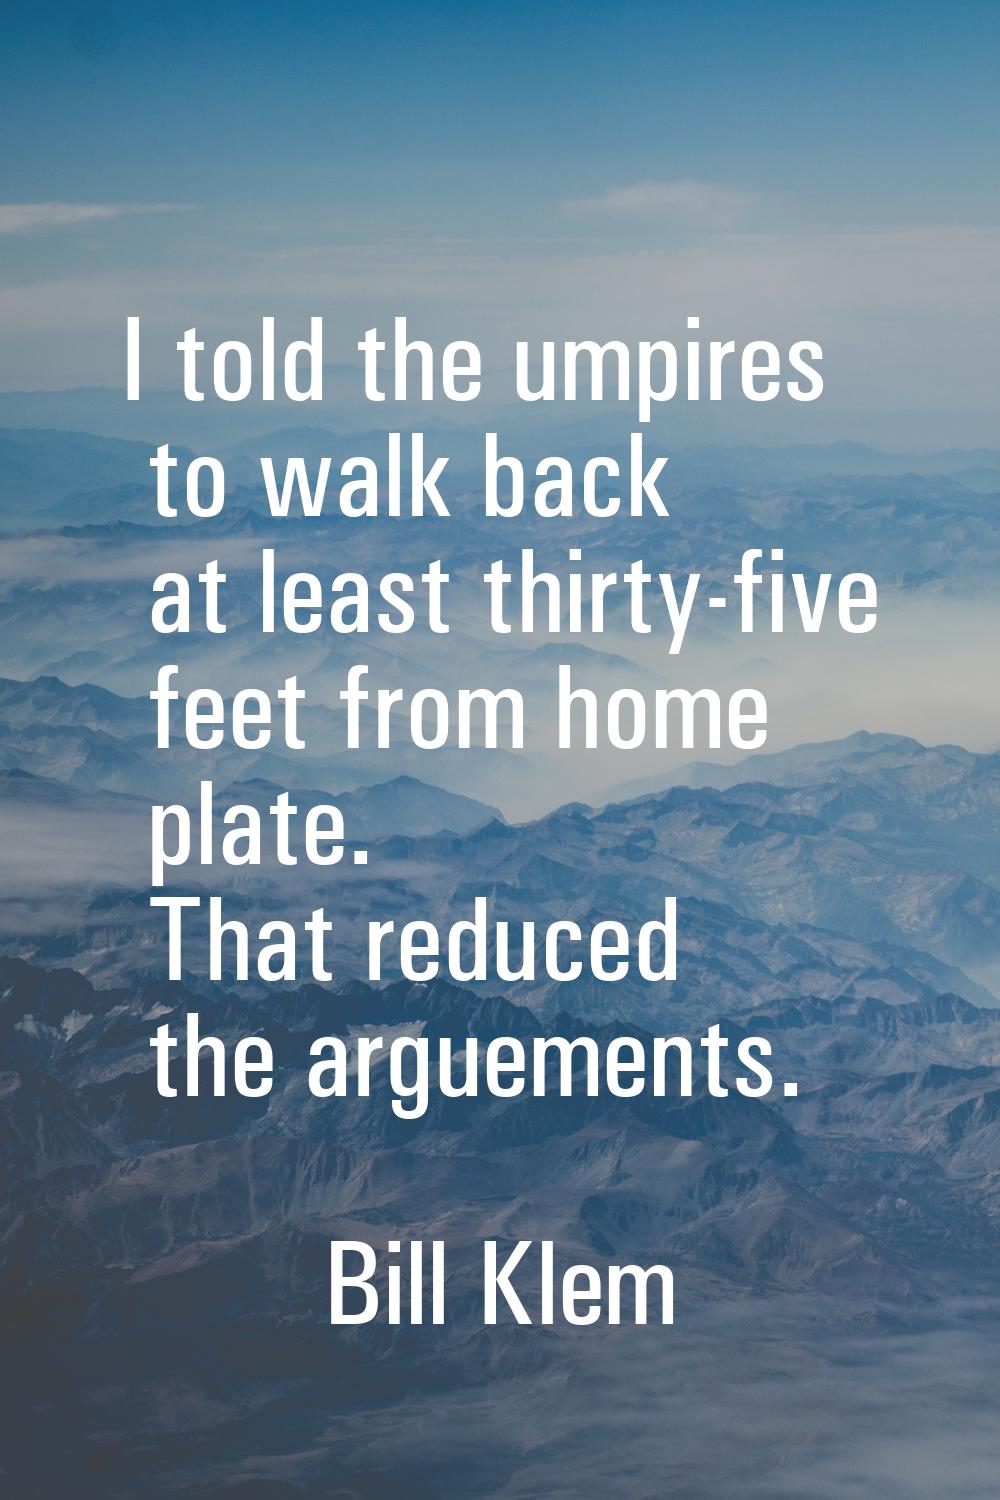 I told the umpires to walk back at least thirty-five feet from home plate. That reduced the argueme